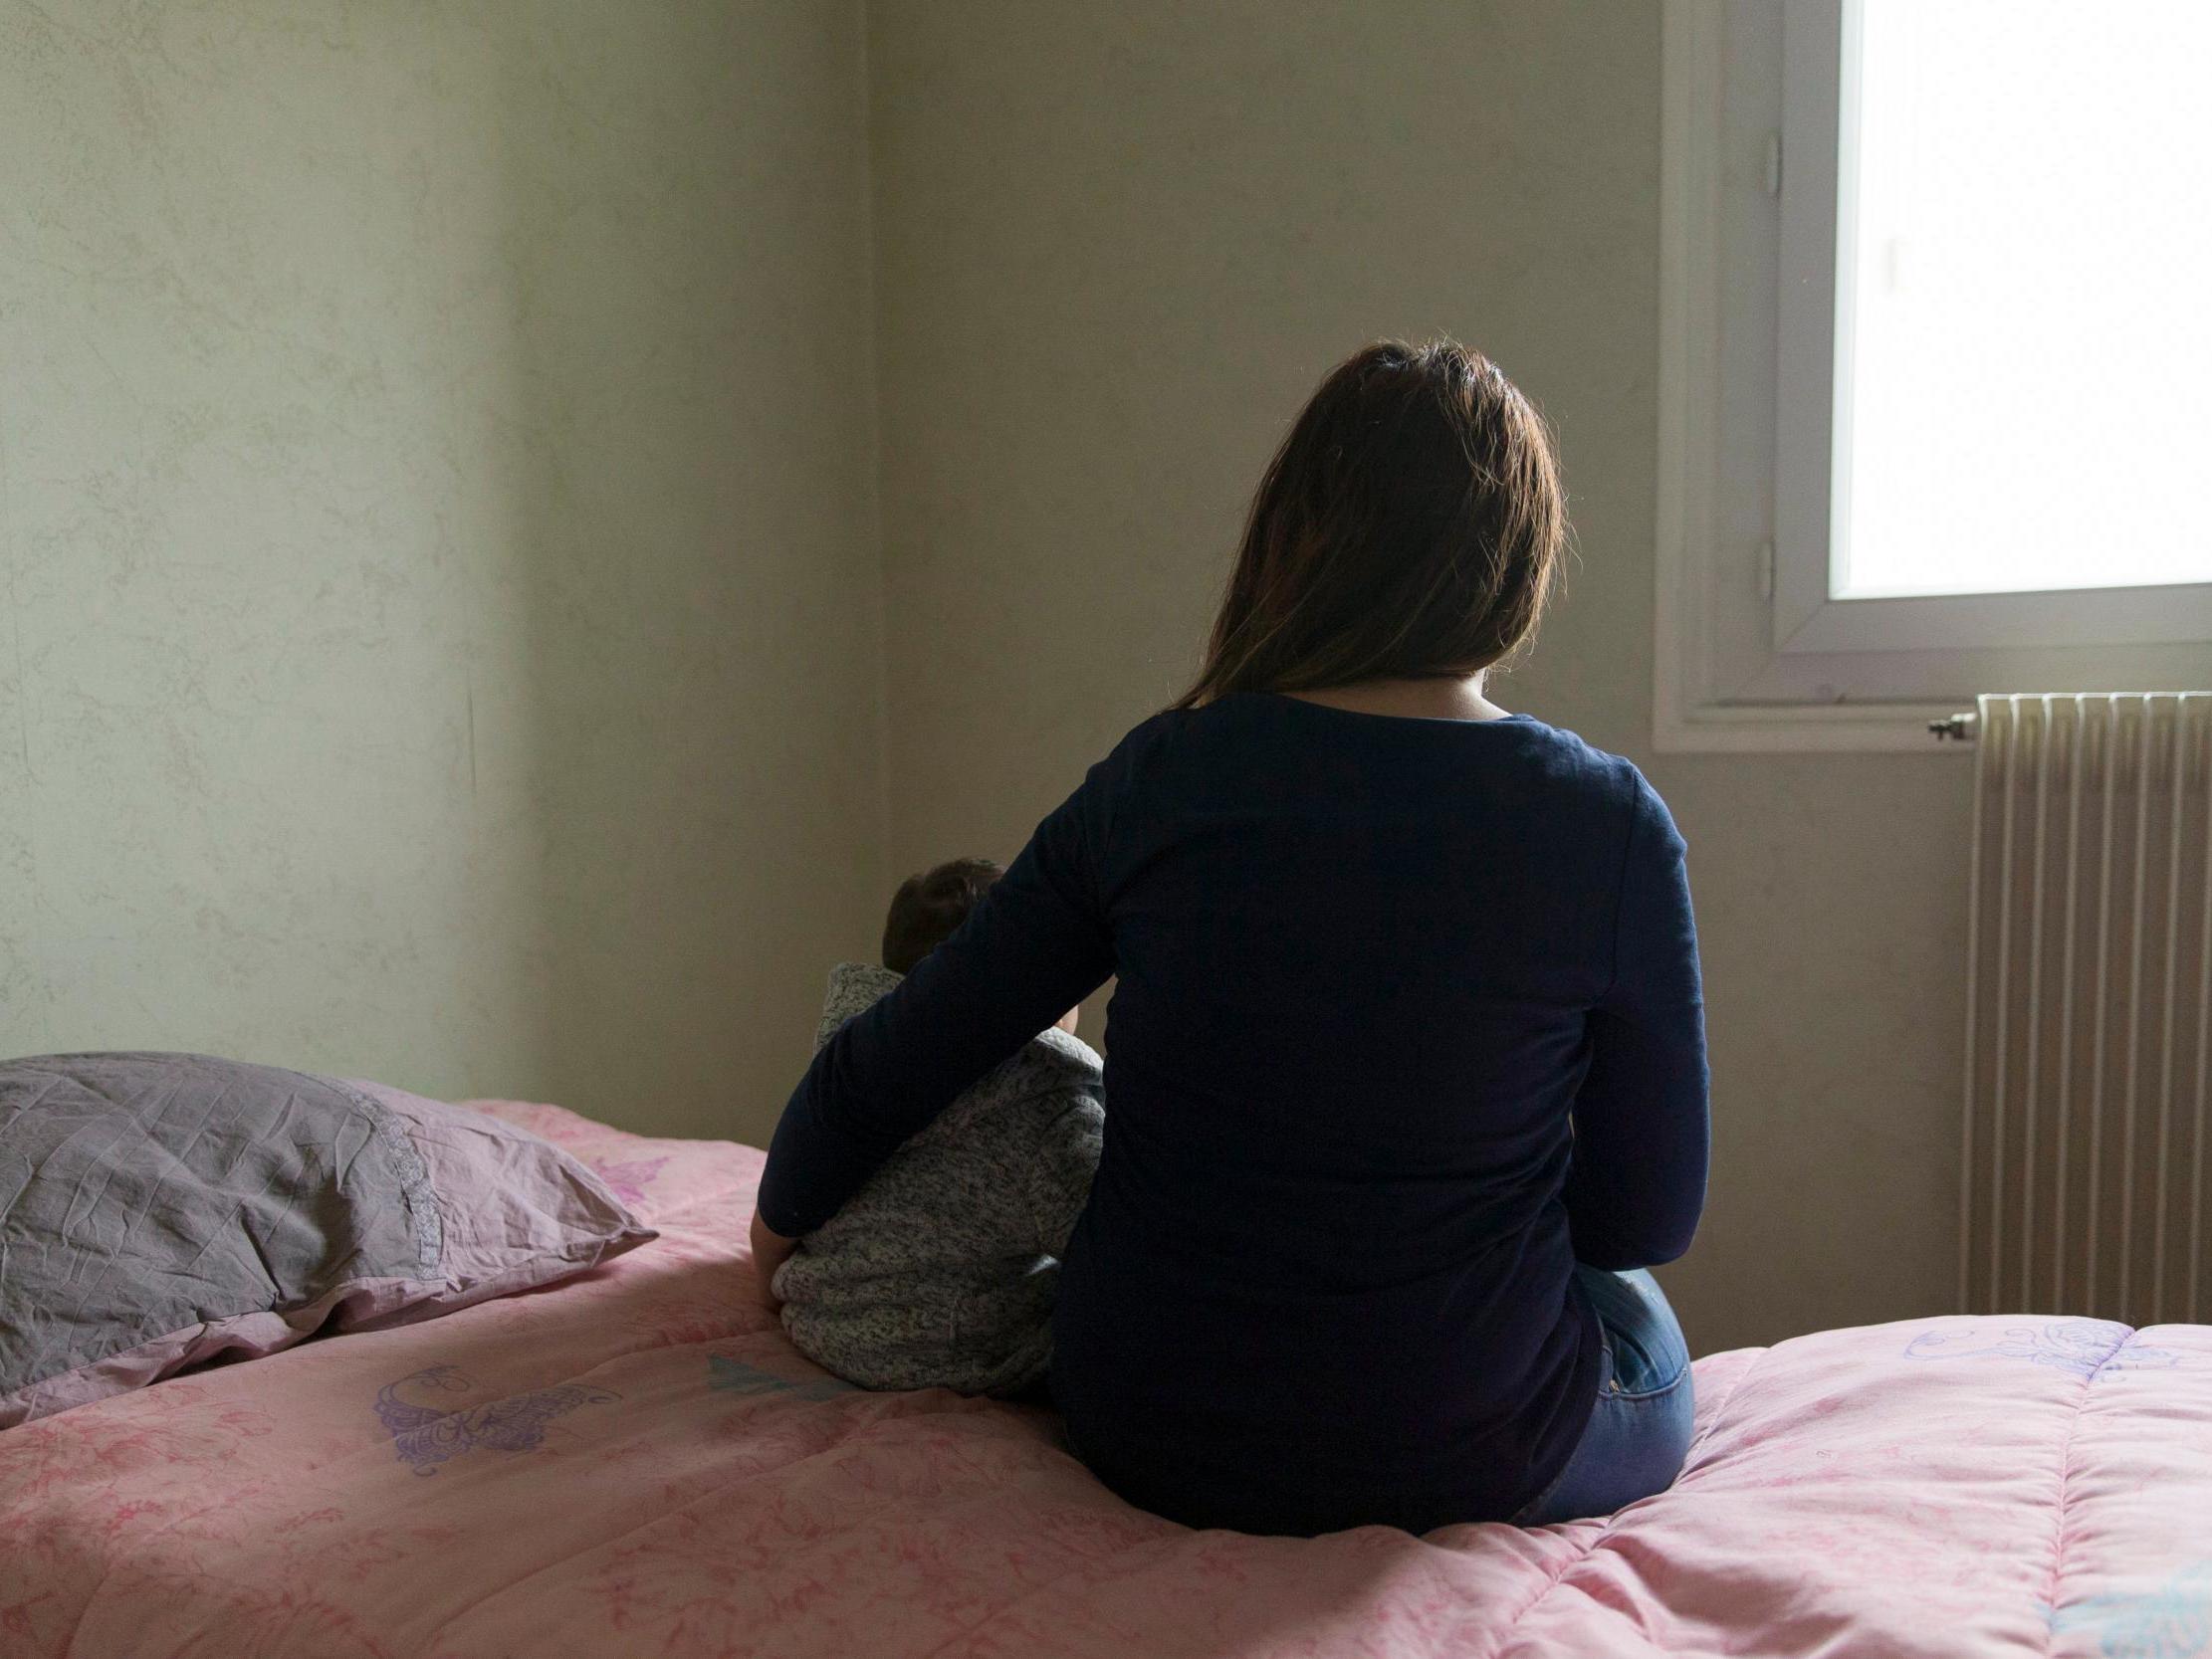 visits to the UK’s online national domestic abuse service have surged by 700 per cent in a single day in the wake of the Covid-19 outbreak